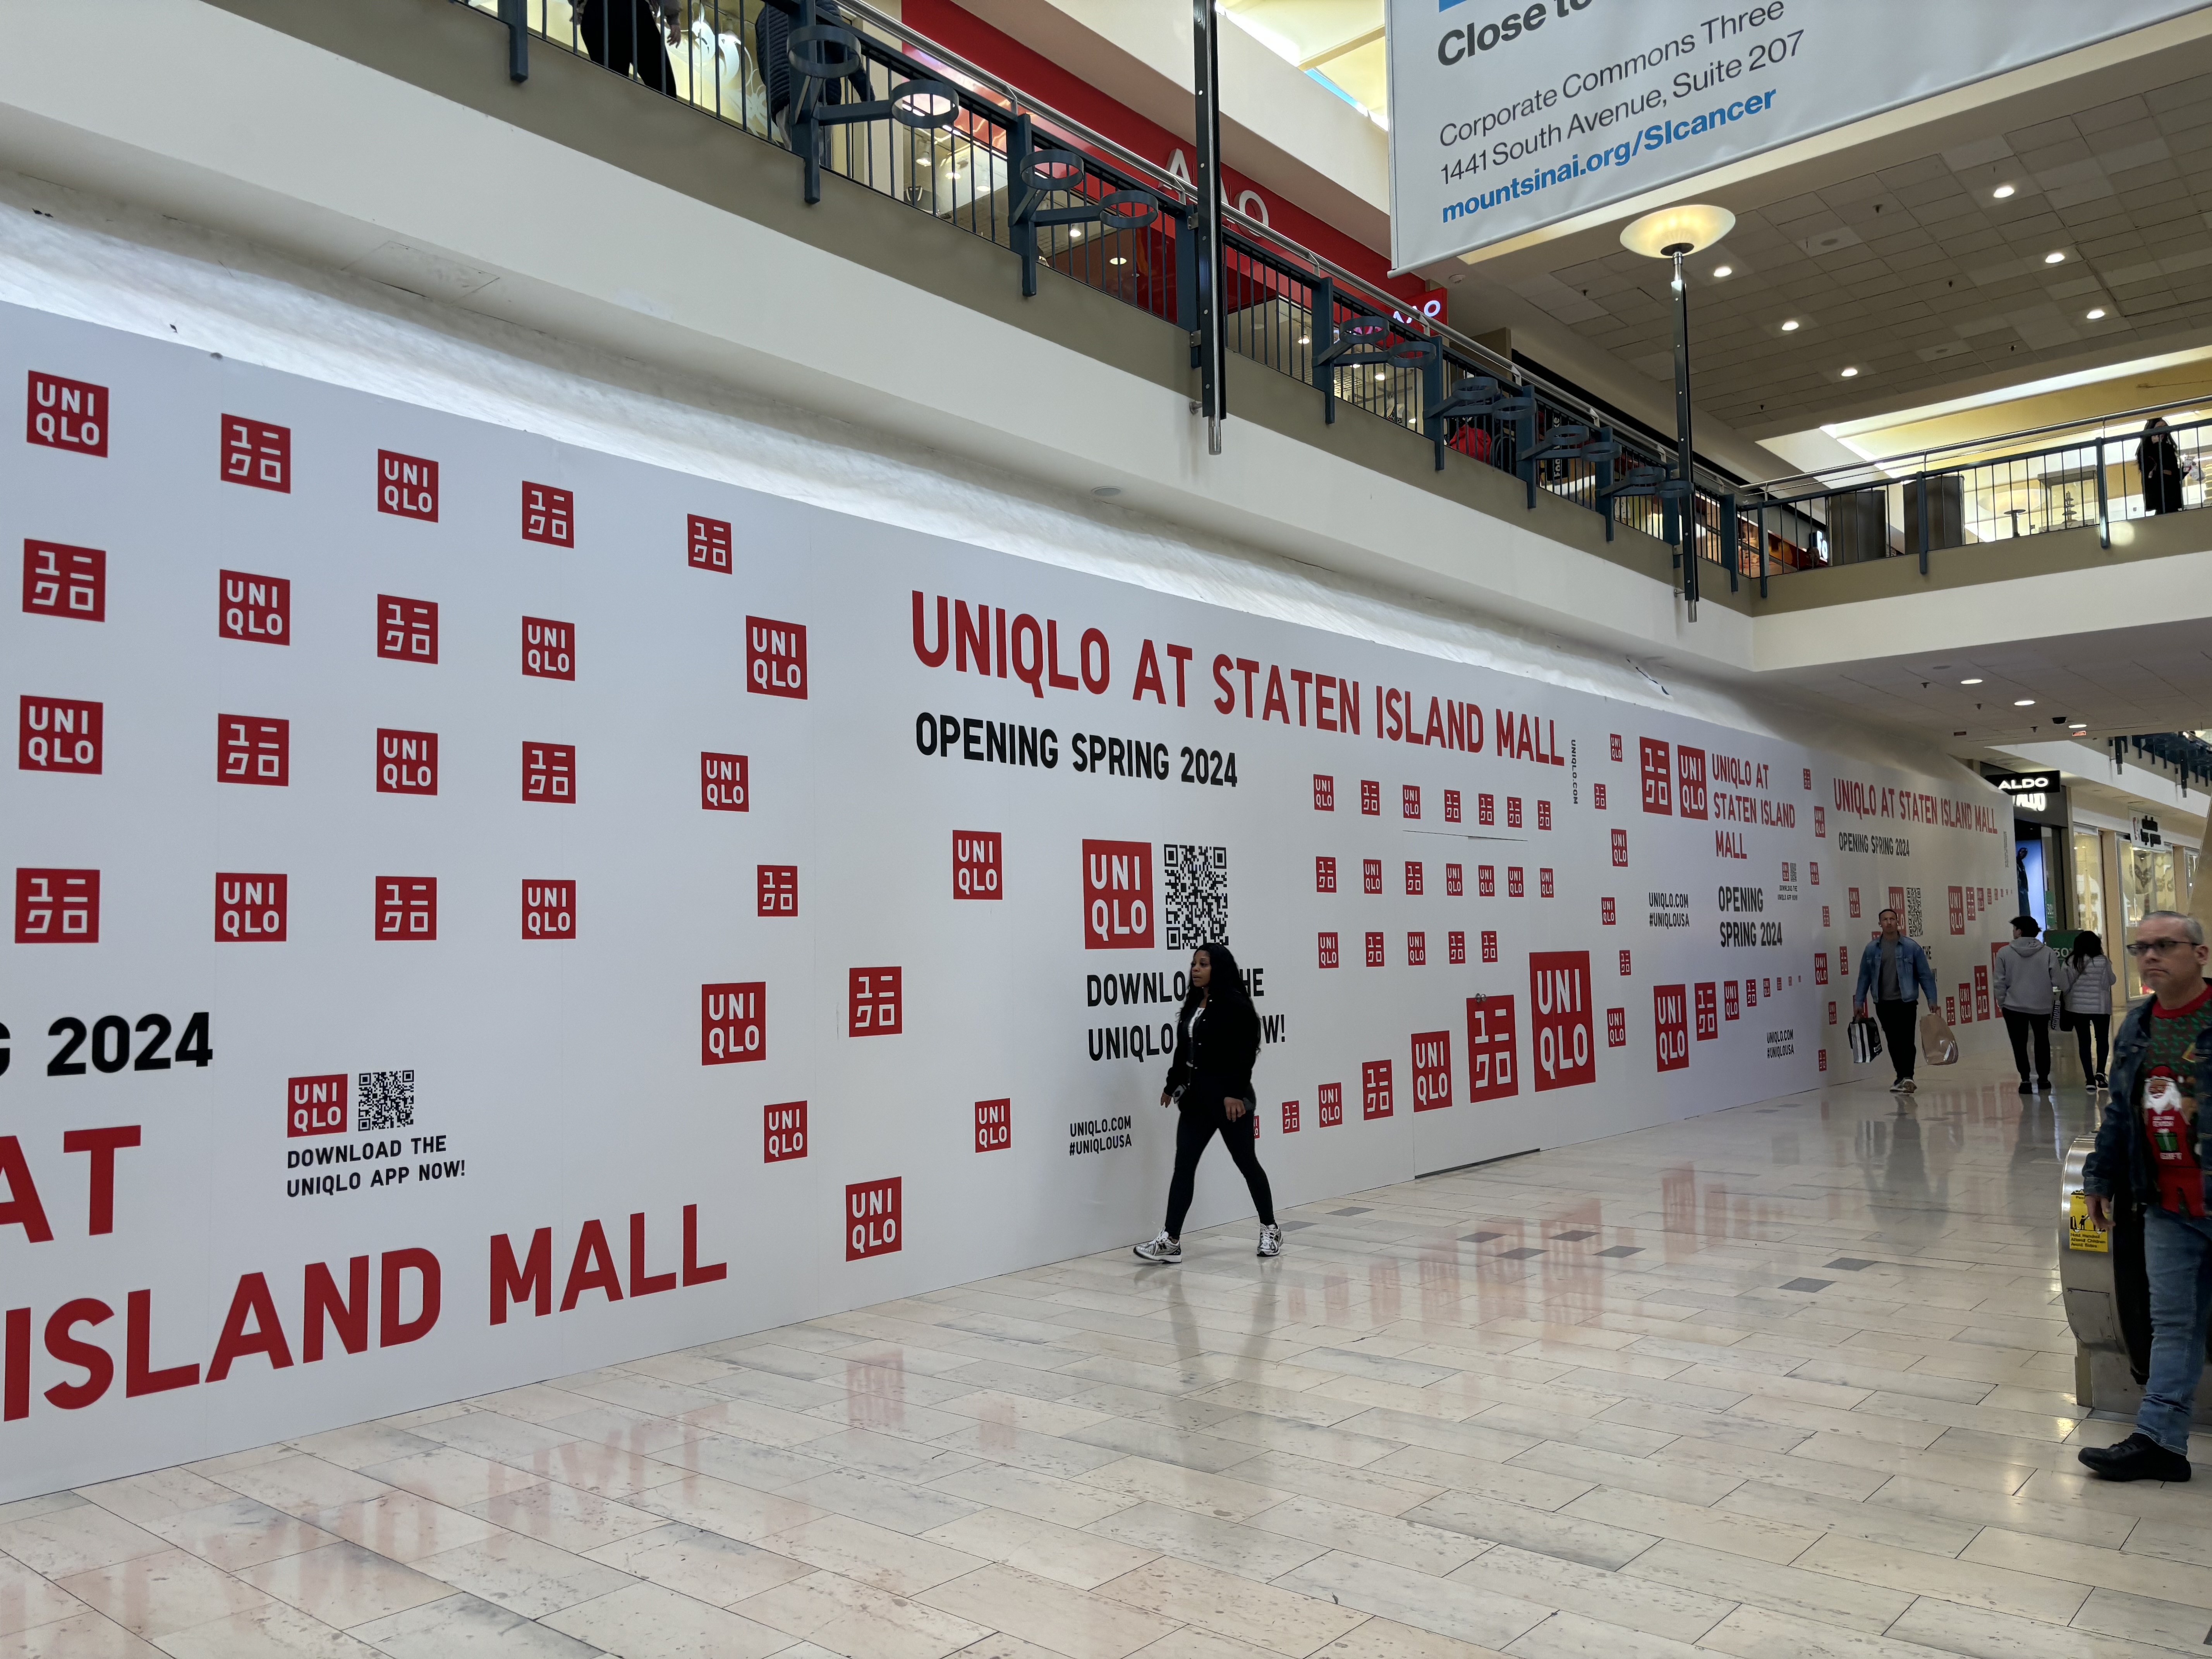 Japanese retail store UNIQLO returning to Staten Island Mall in 2024 